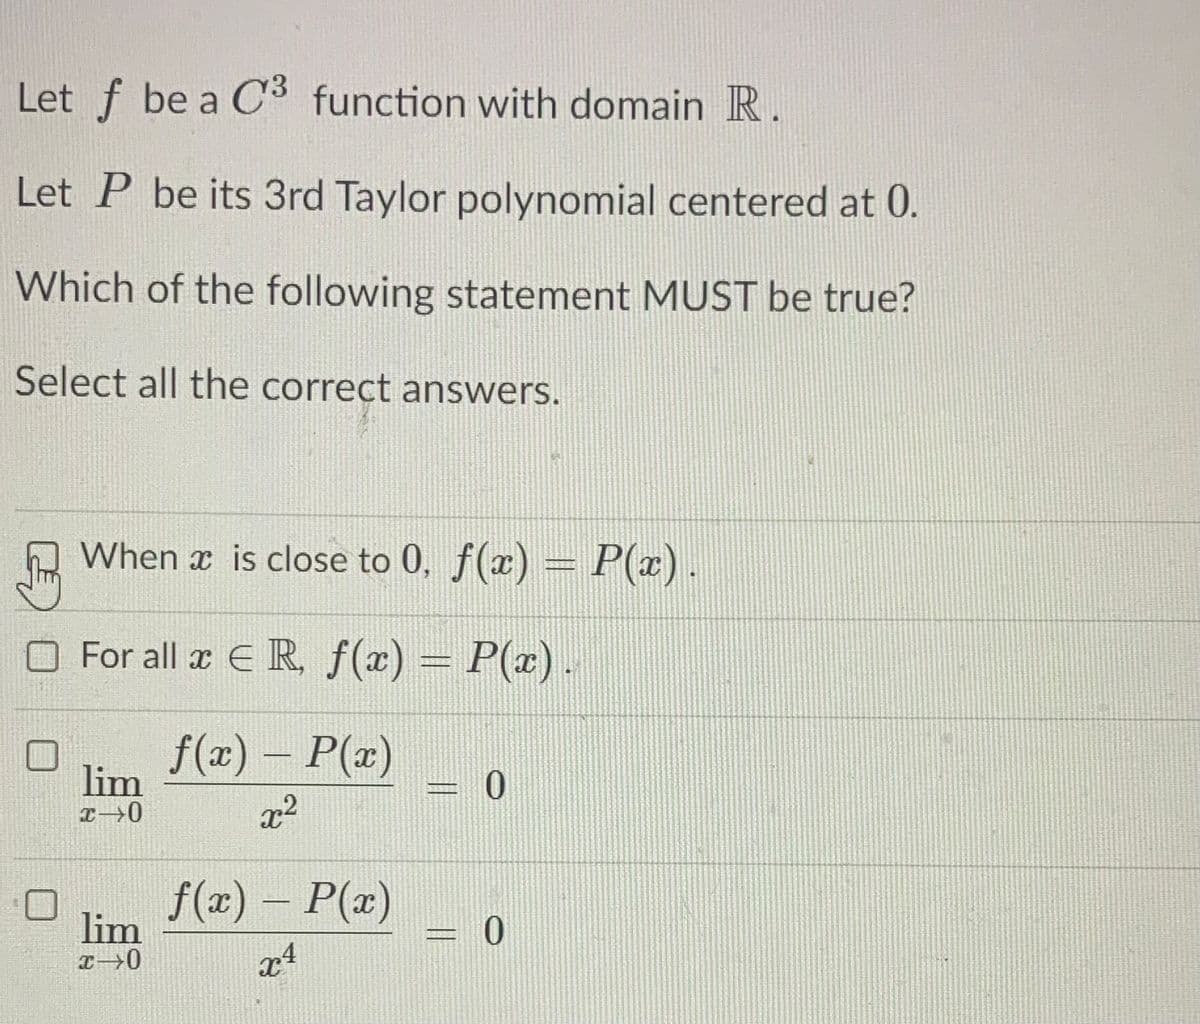 Let f be a C3 function with domain R.
Let P be its 3rd Taylor polynomial centered at 0.
Which of the following statement MUST be true?
Select all the correct answers.
When x is close to 0, f(x) = P(x).
For all x E R, f(x) = P(x).
1837
f(x) – P(x)
lim
|
x2
f(x) – P(x)
lim
